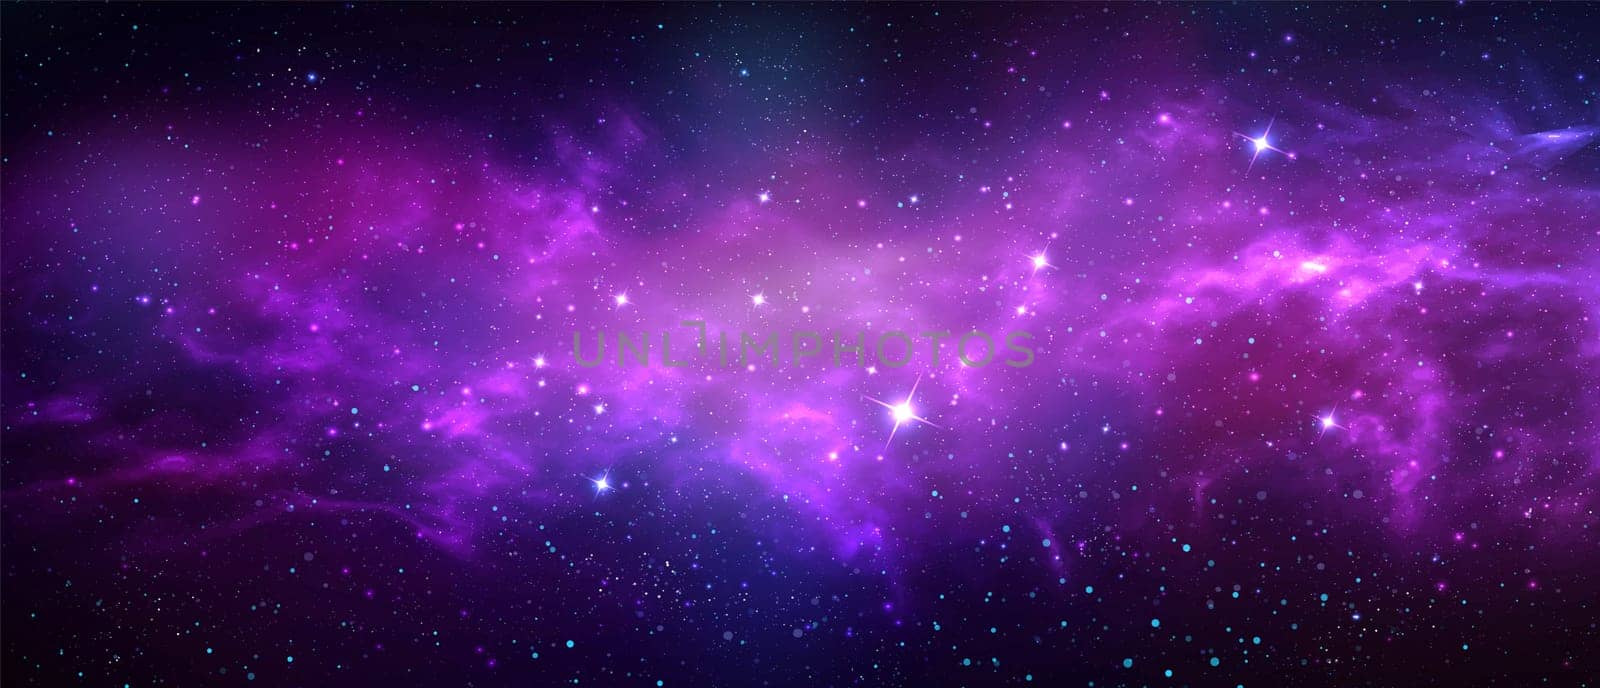 Space background with realistic nebula and shining stars. Magic colorful galaxy with stardust by Whatawin